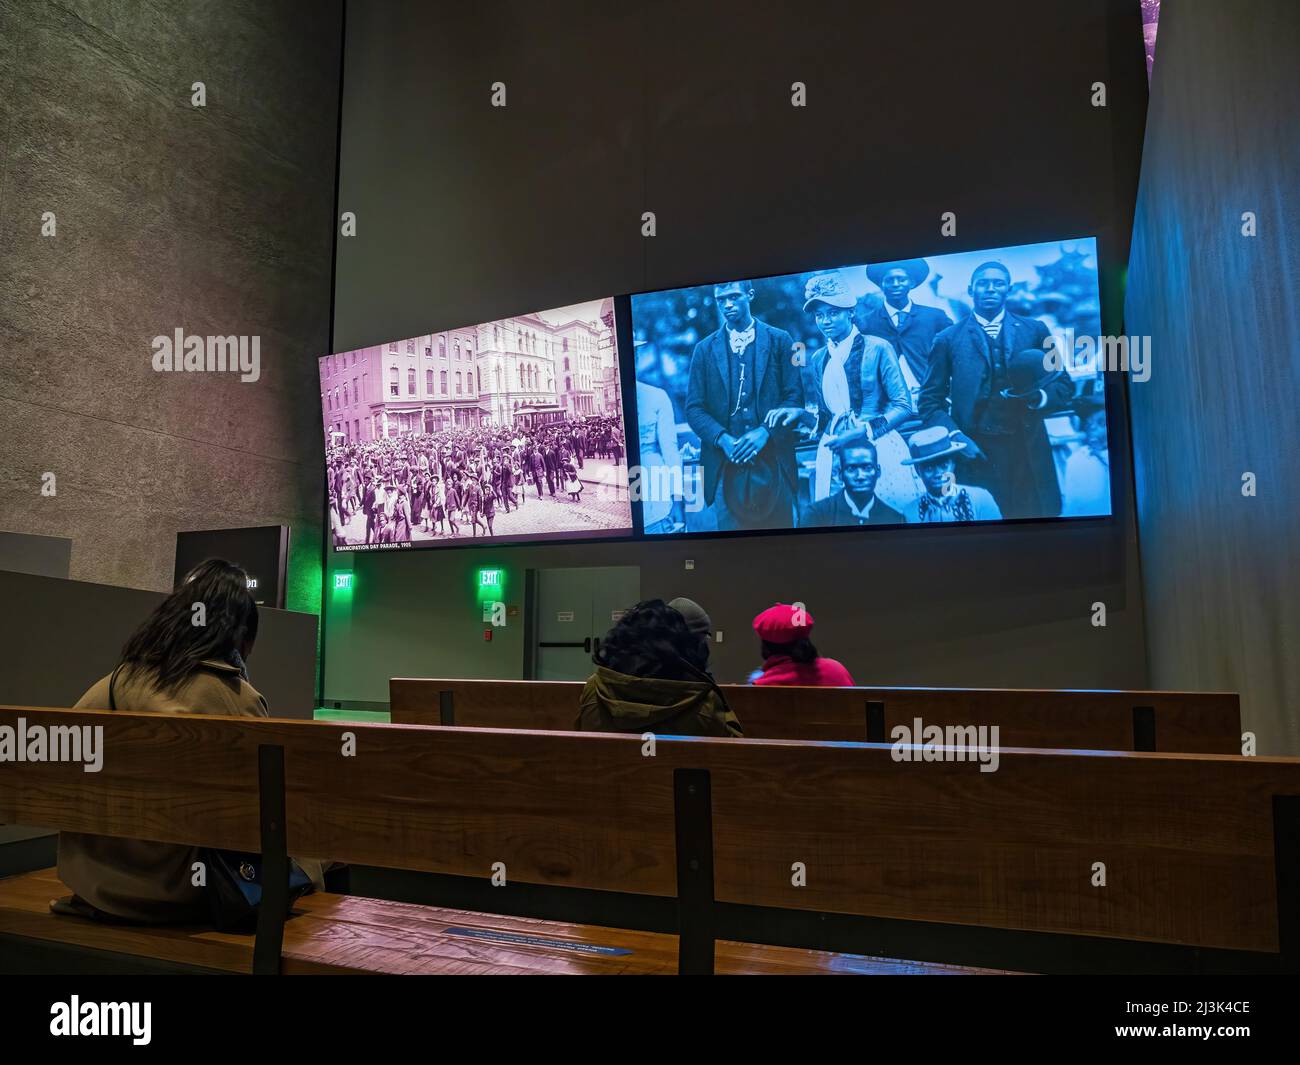 Washington DC, APR 1 2022 - Interior view of the National Museum of African American History and Culture Stock Photo